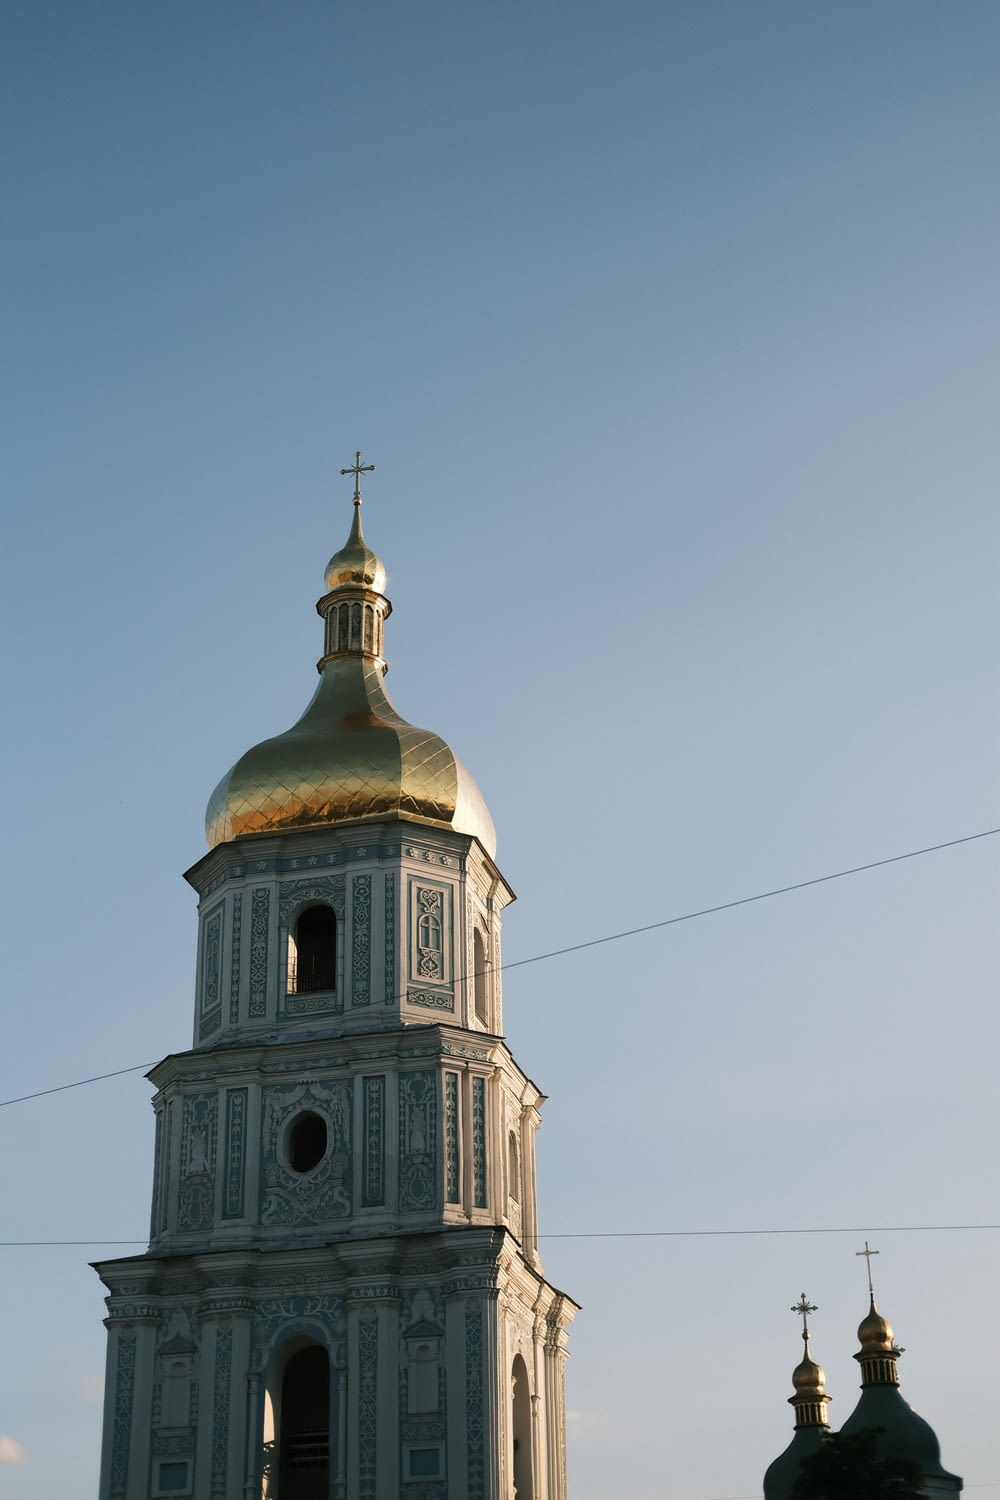 a building with a gold domed roof